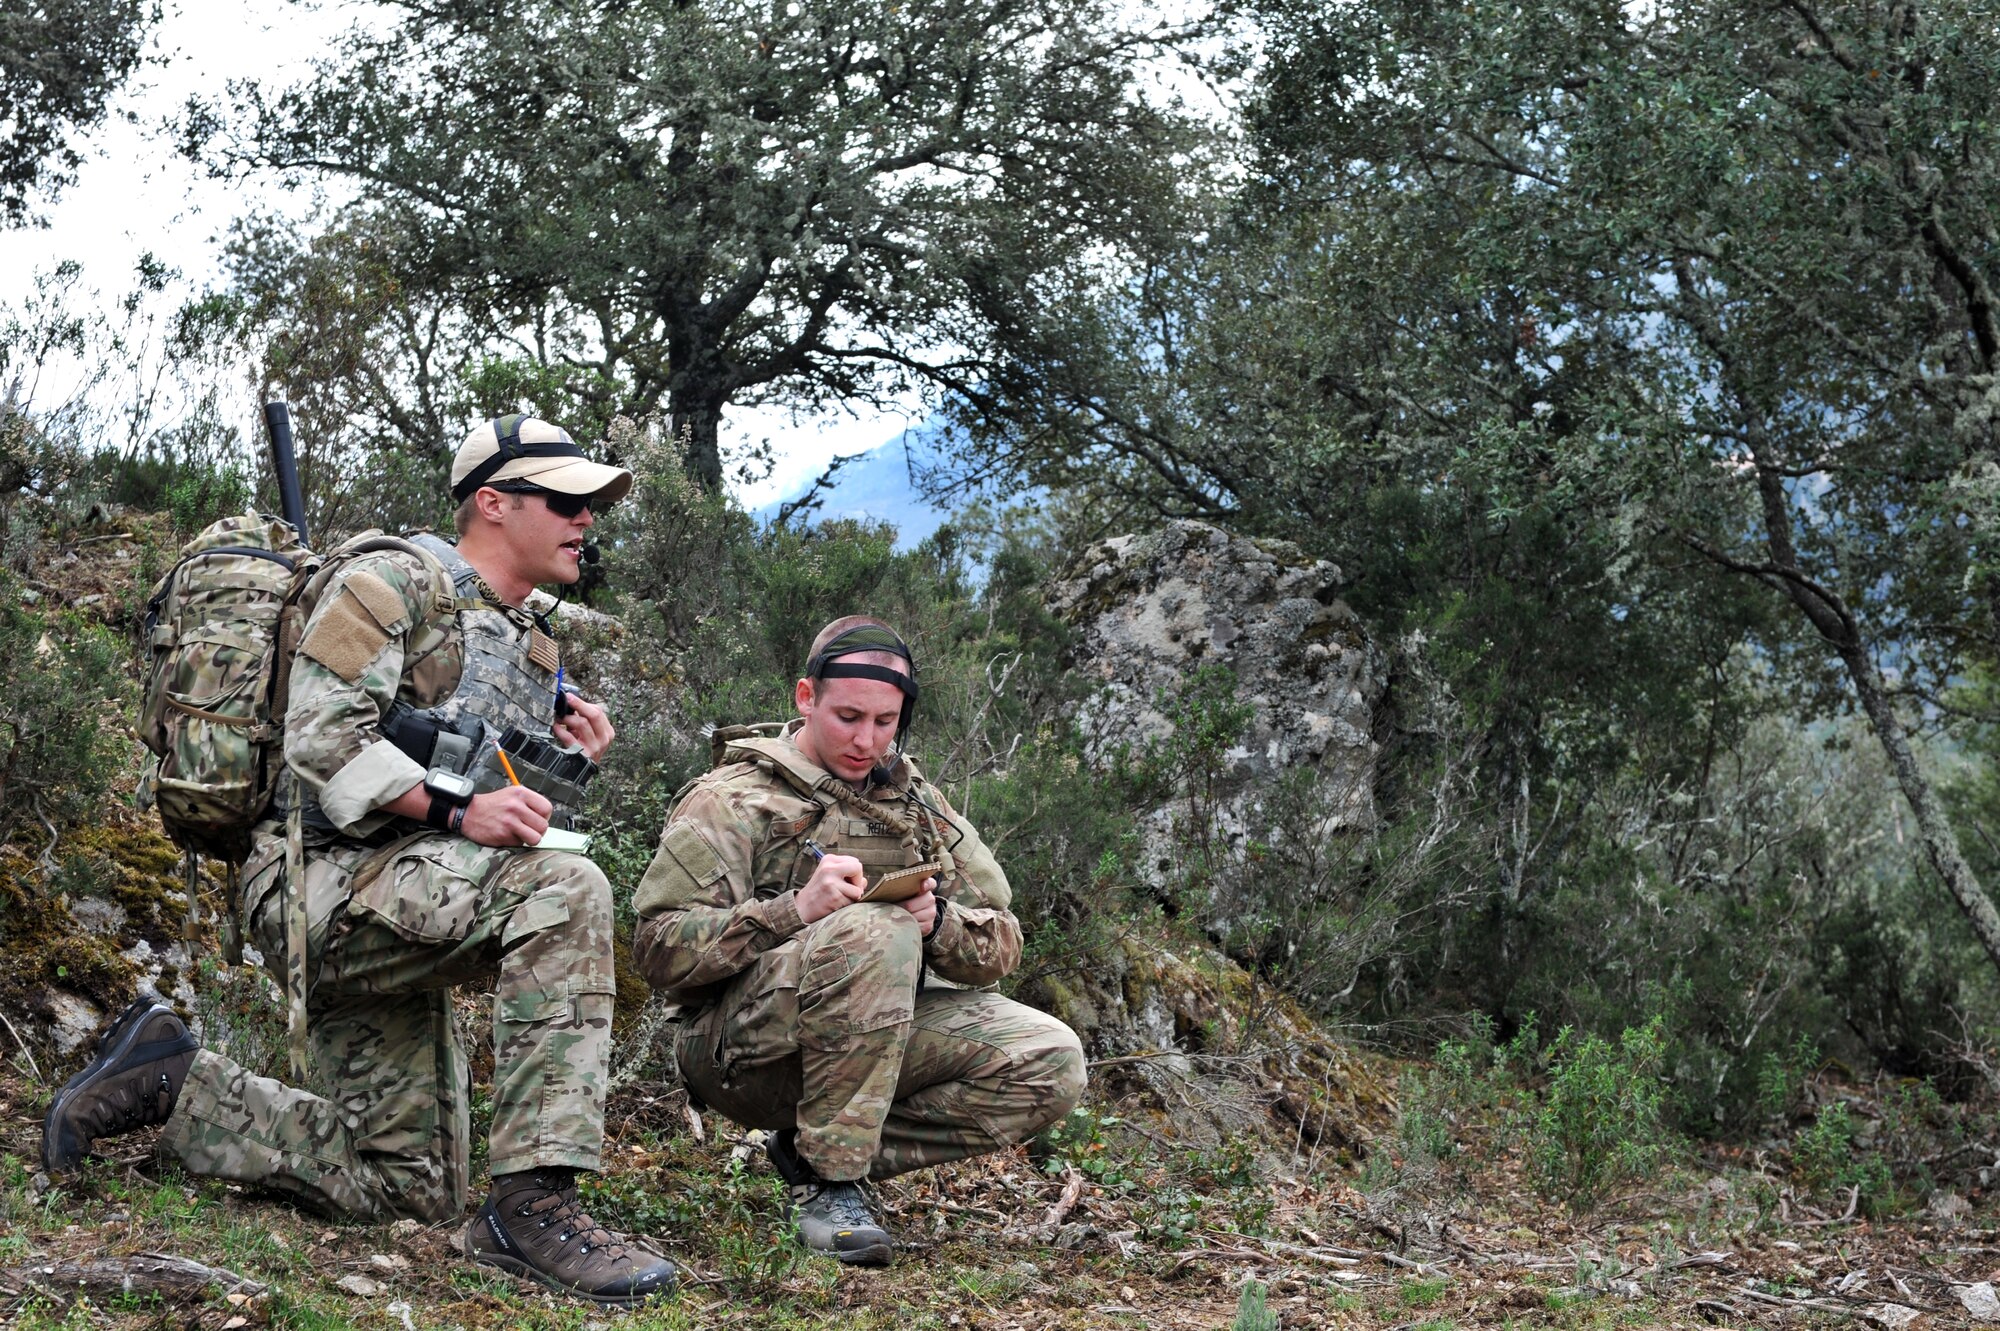 Air Force 2nd Lt. Houston Nelson and Senior Airman Eric Reitz, 2nd Air Support Operations Squadron, simulate calling in an air attack during the Serpentex Exercise on Corsica, France, April 3, 2012. The regional air exercise consisted of multi-national forces performing close air support misssions to prepare crews for Afghan operation (U.S. Air Force photo/Airman 1st Class Caitlin O'Neil-McKeown)